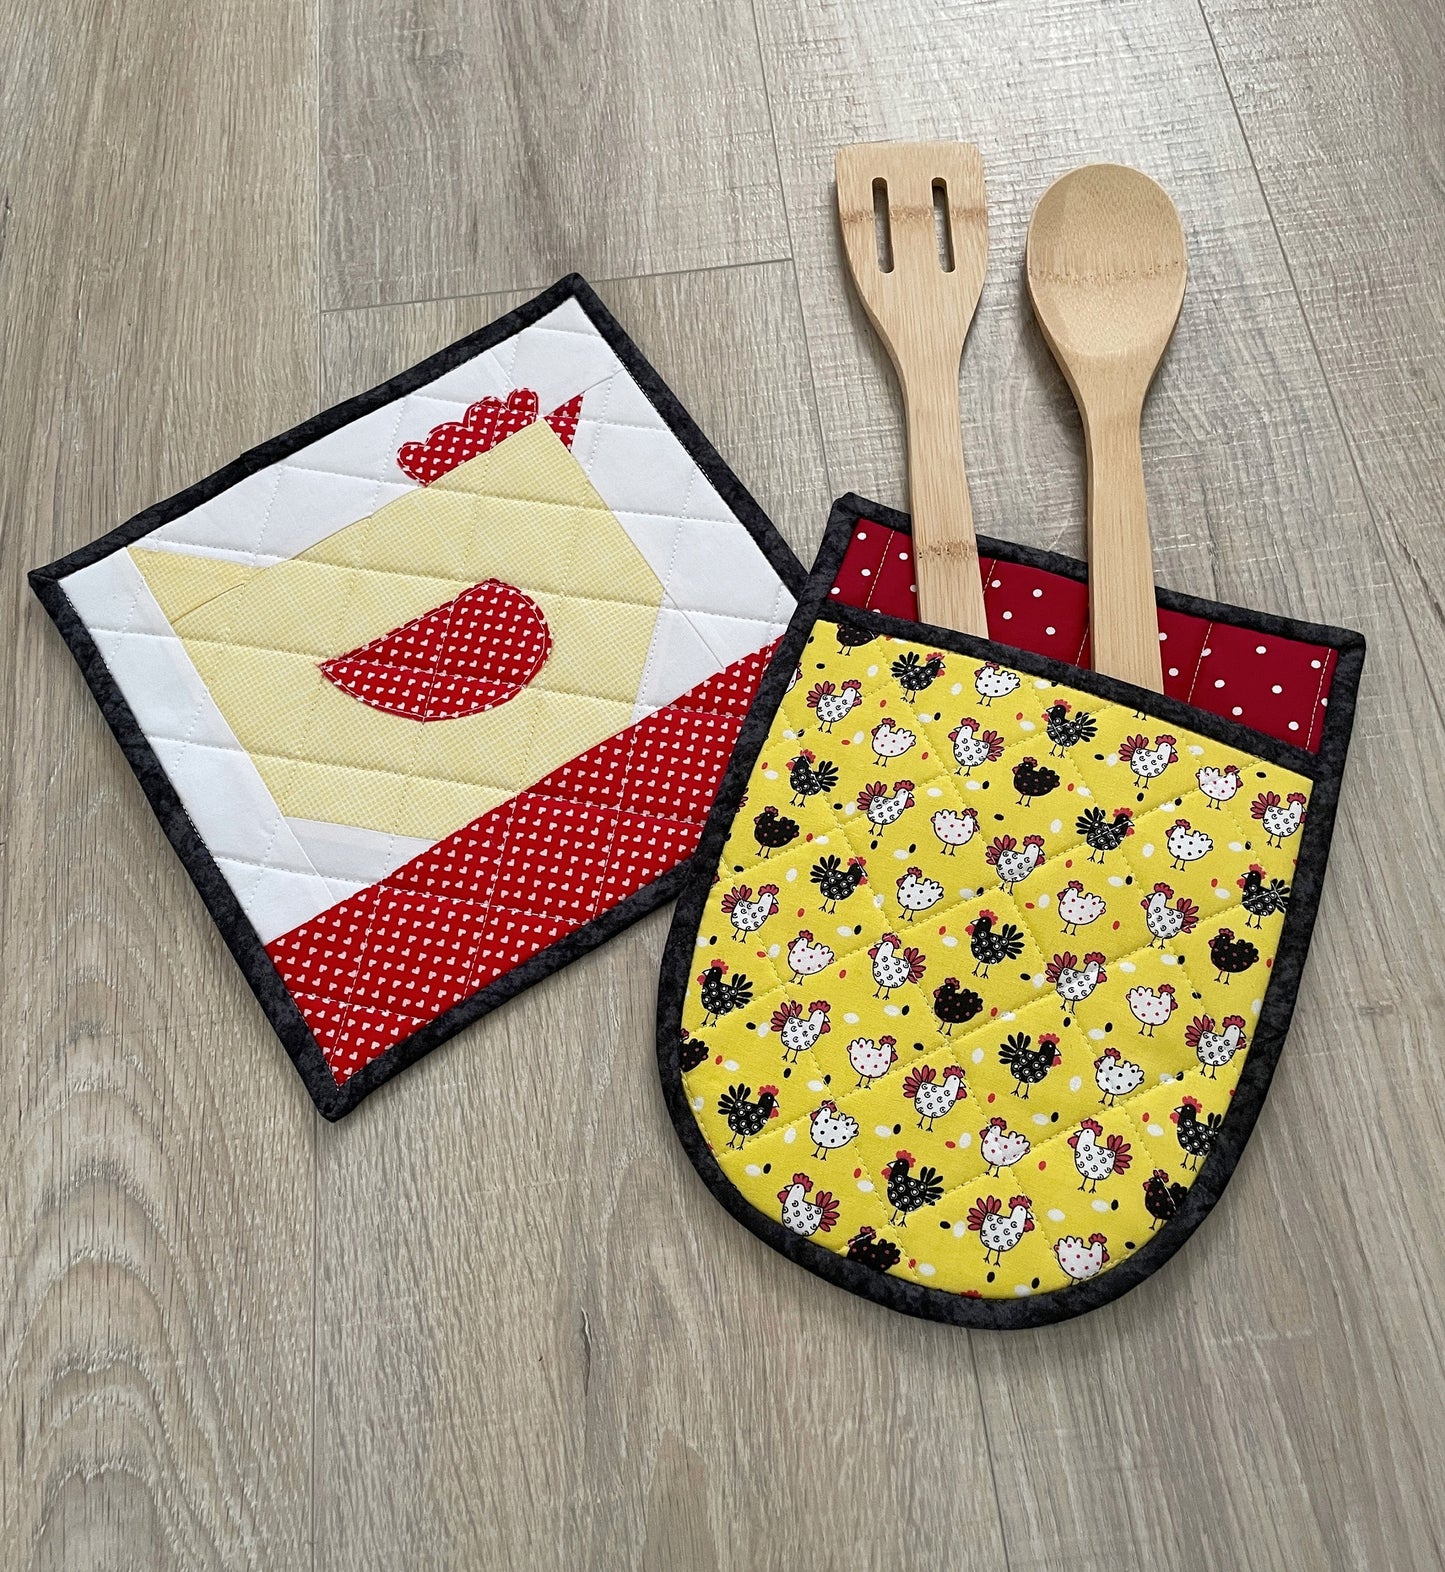 Farmhouse Chic Quilted Chicken Potholder Set in Black & Red, Kitchen Gift